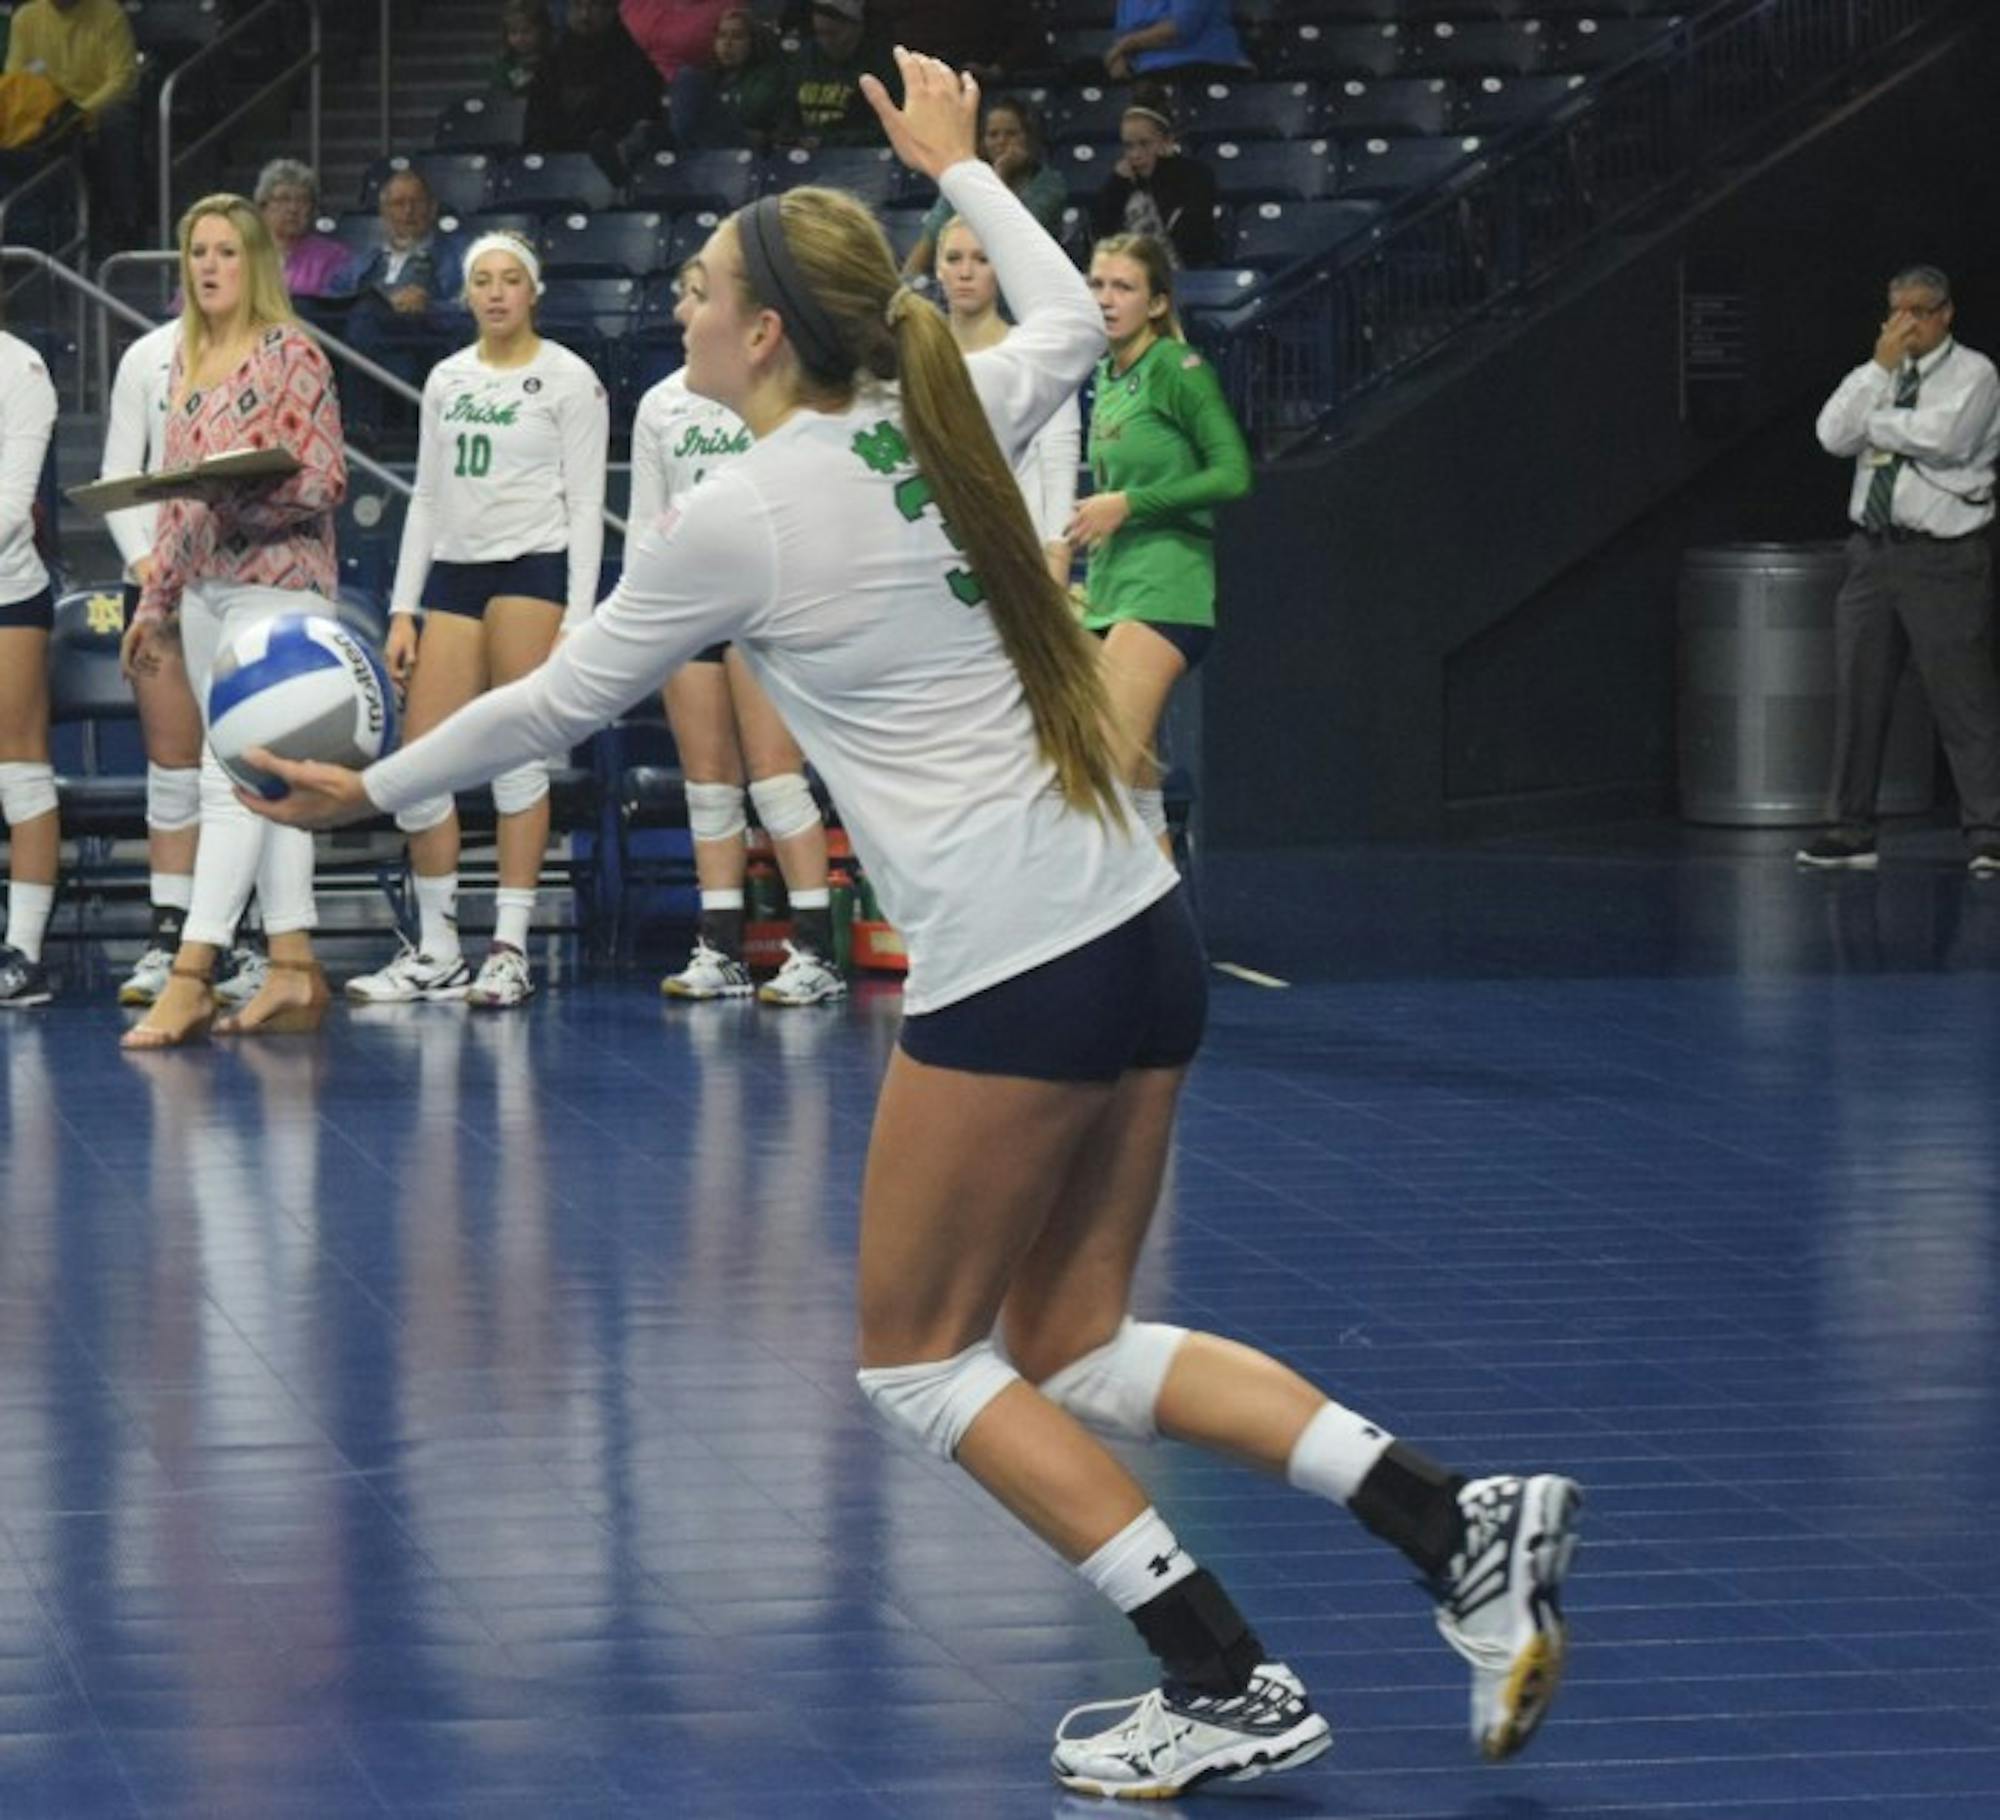 Irish sophomore outside hitter Sam Fry winds up for a serve during Notre Dame’s 3-1 victory over Mississippi State on Sept. 11.